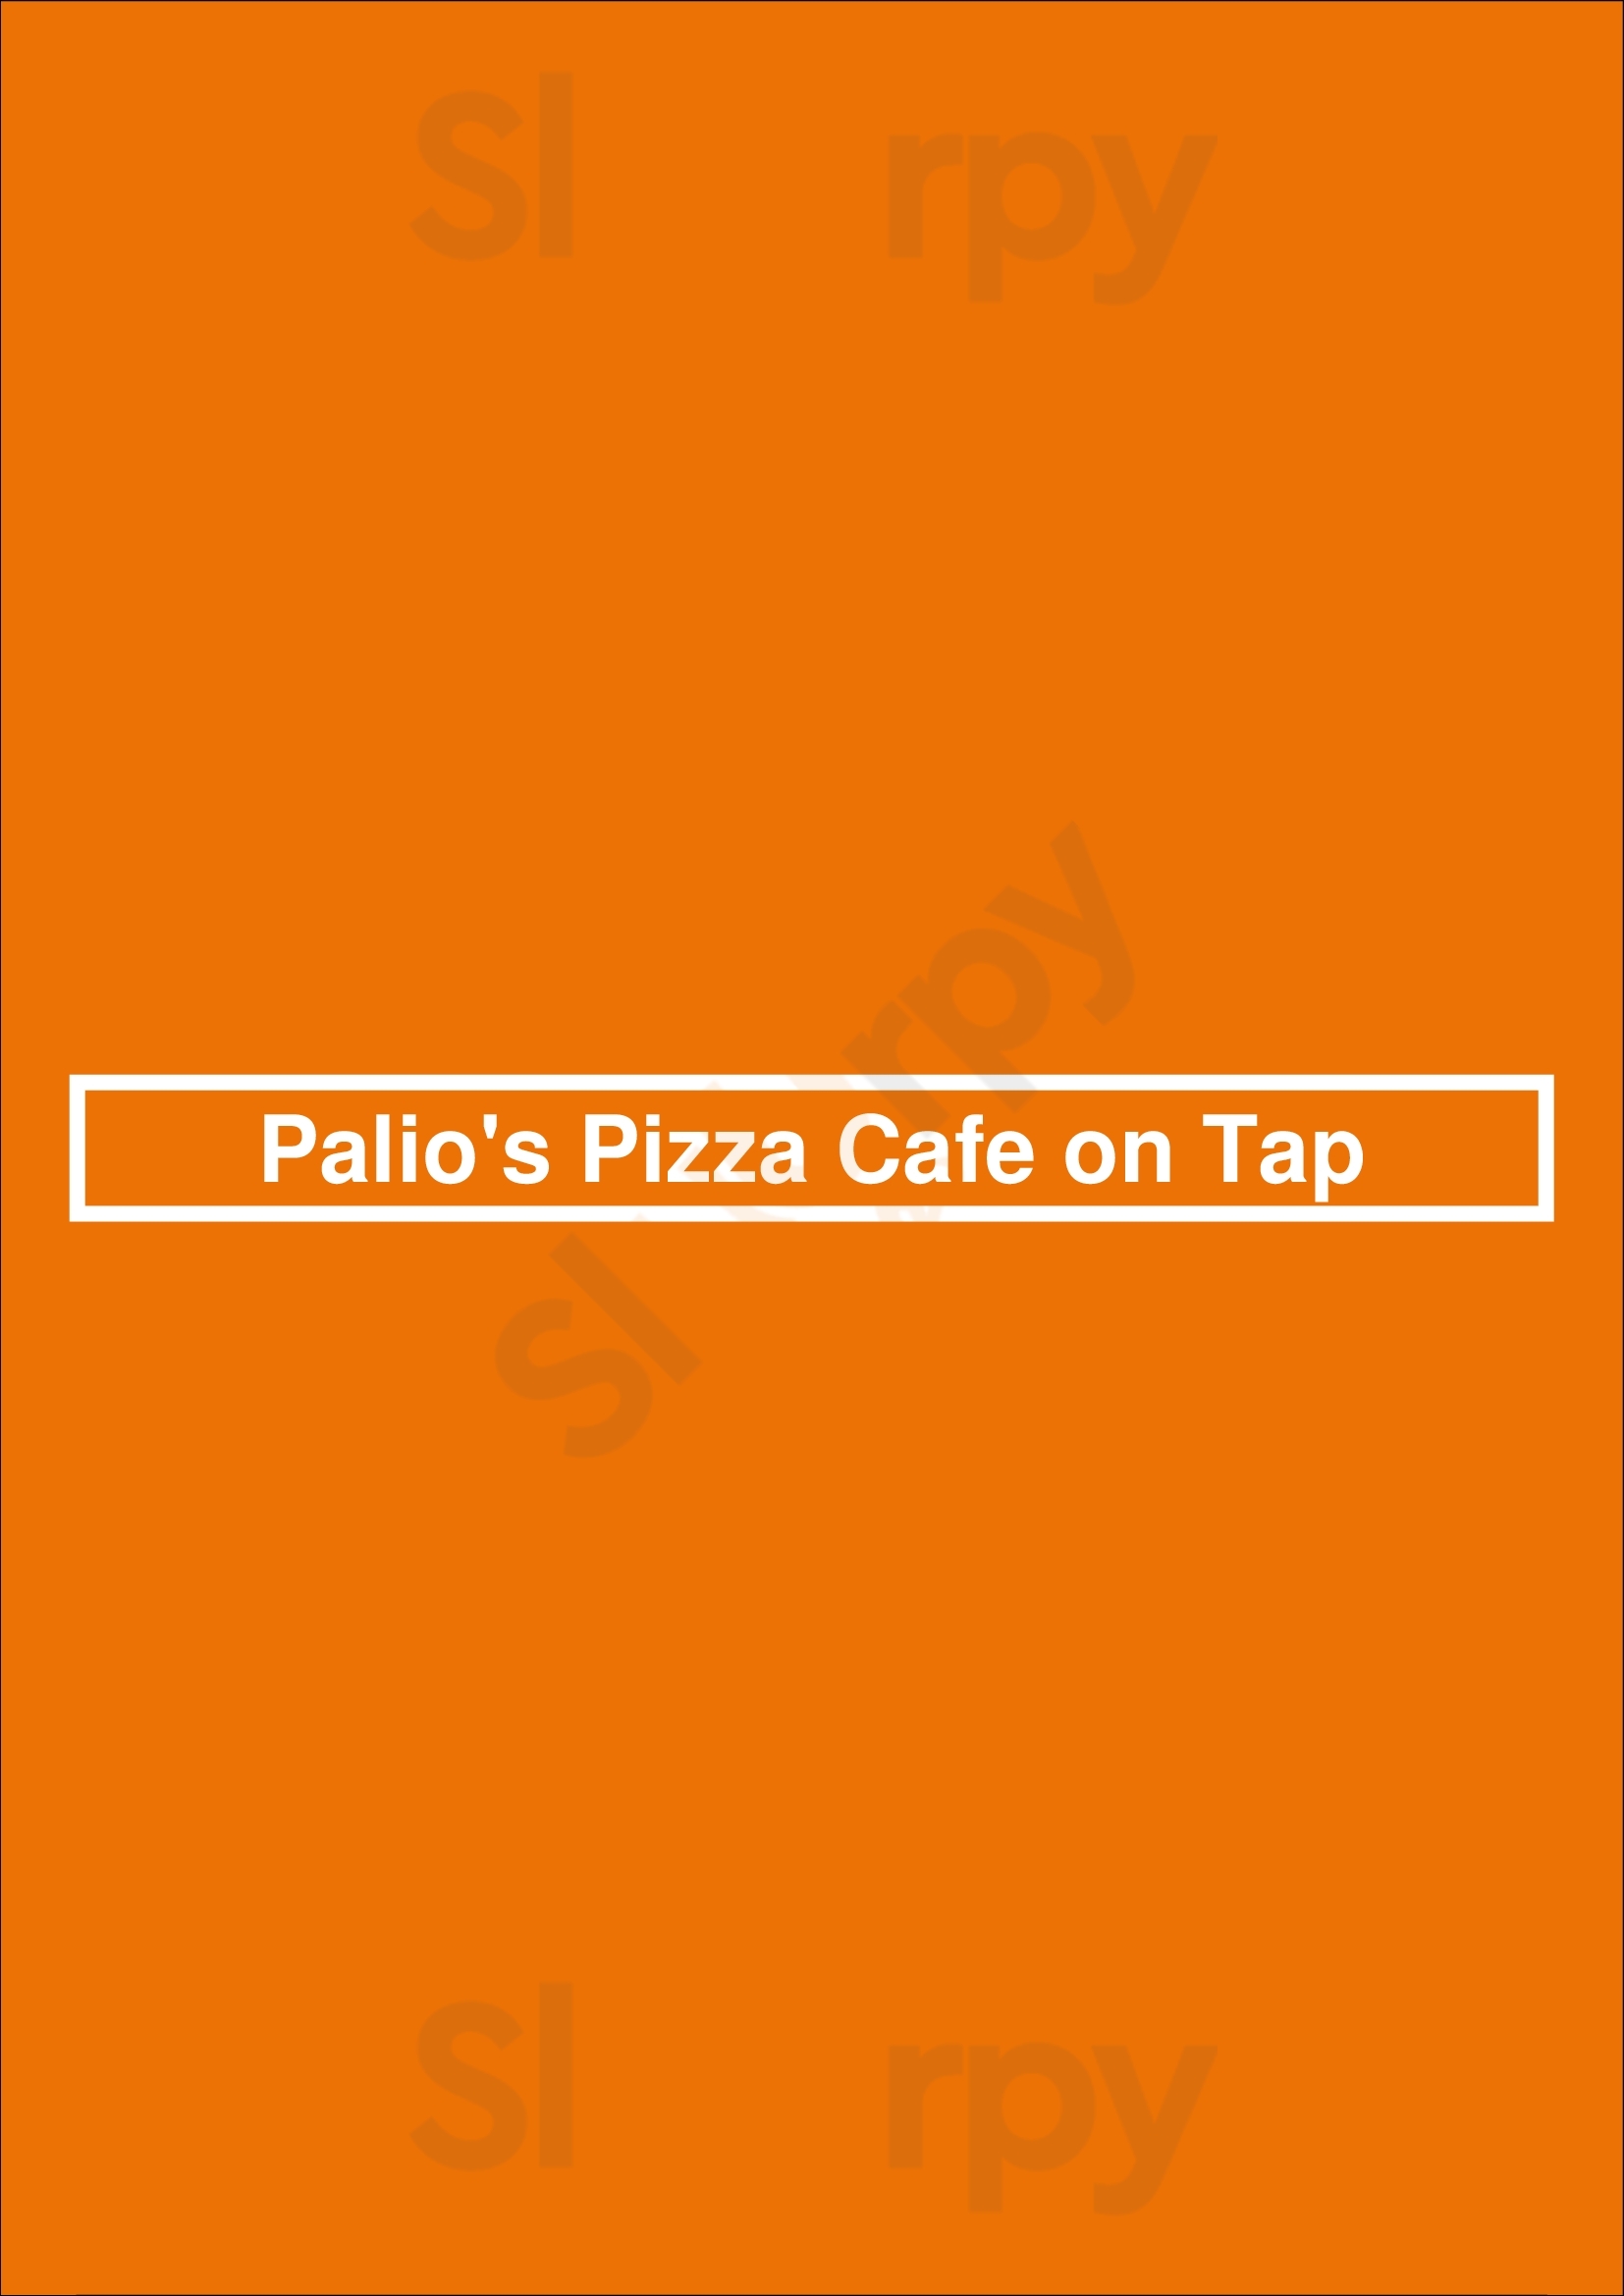 Palio's Pizza Cafe On Tap Fort Worth Menu - 1